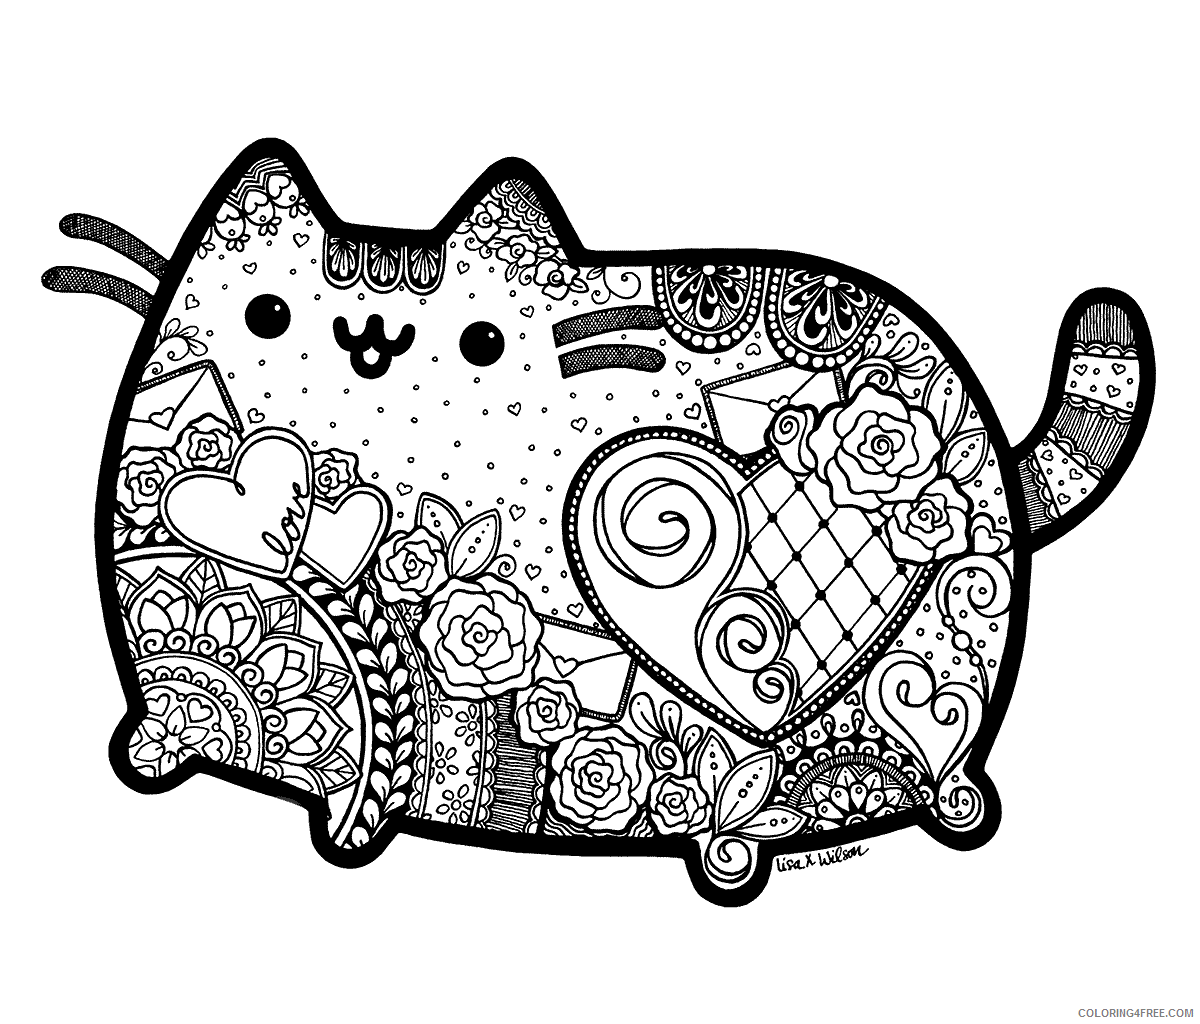 Animal Zentangle Coloring Pages Pusheen Cat Zentangle with Mandalas Printable 2020 175 Coloring4free